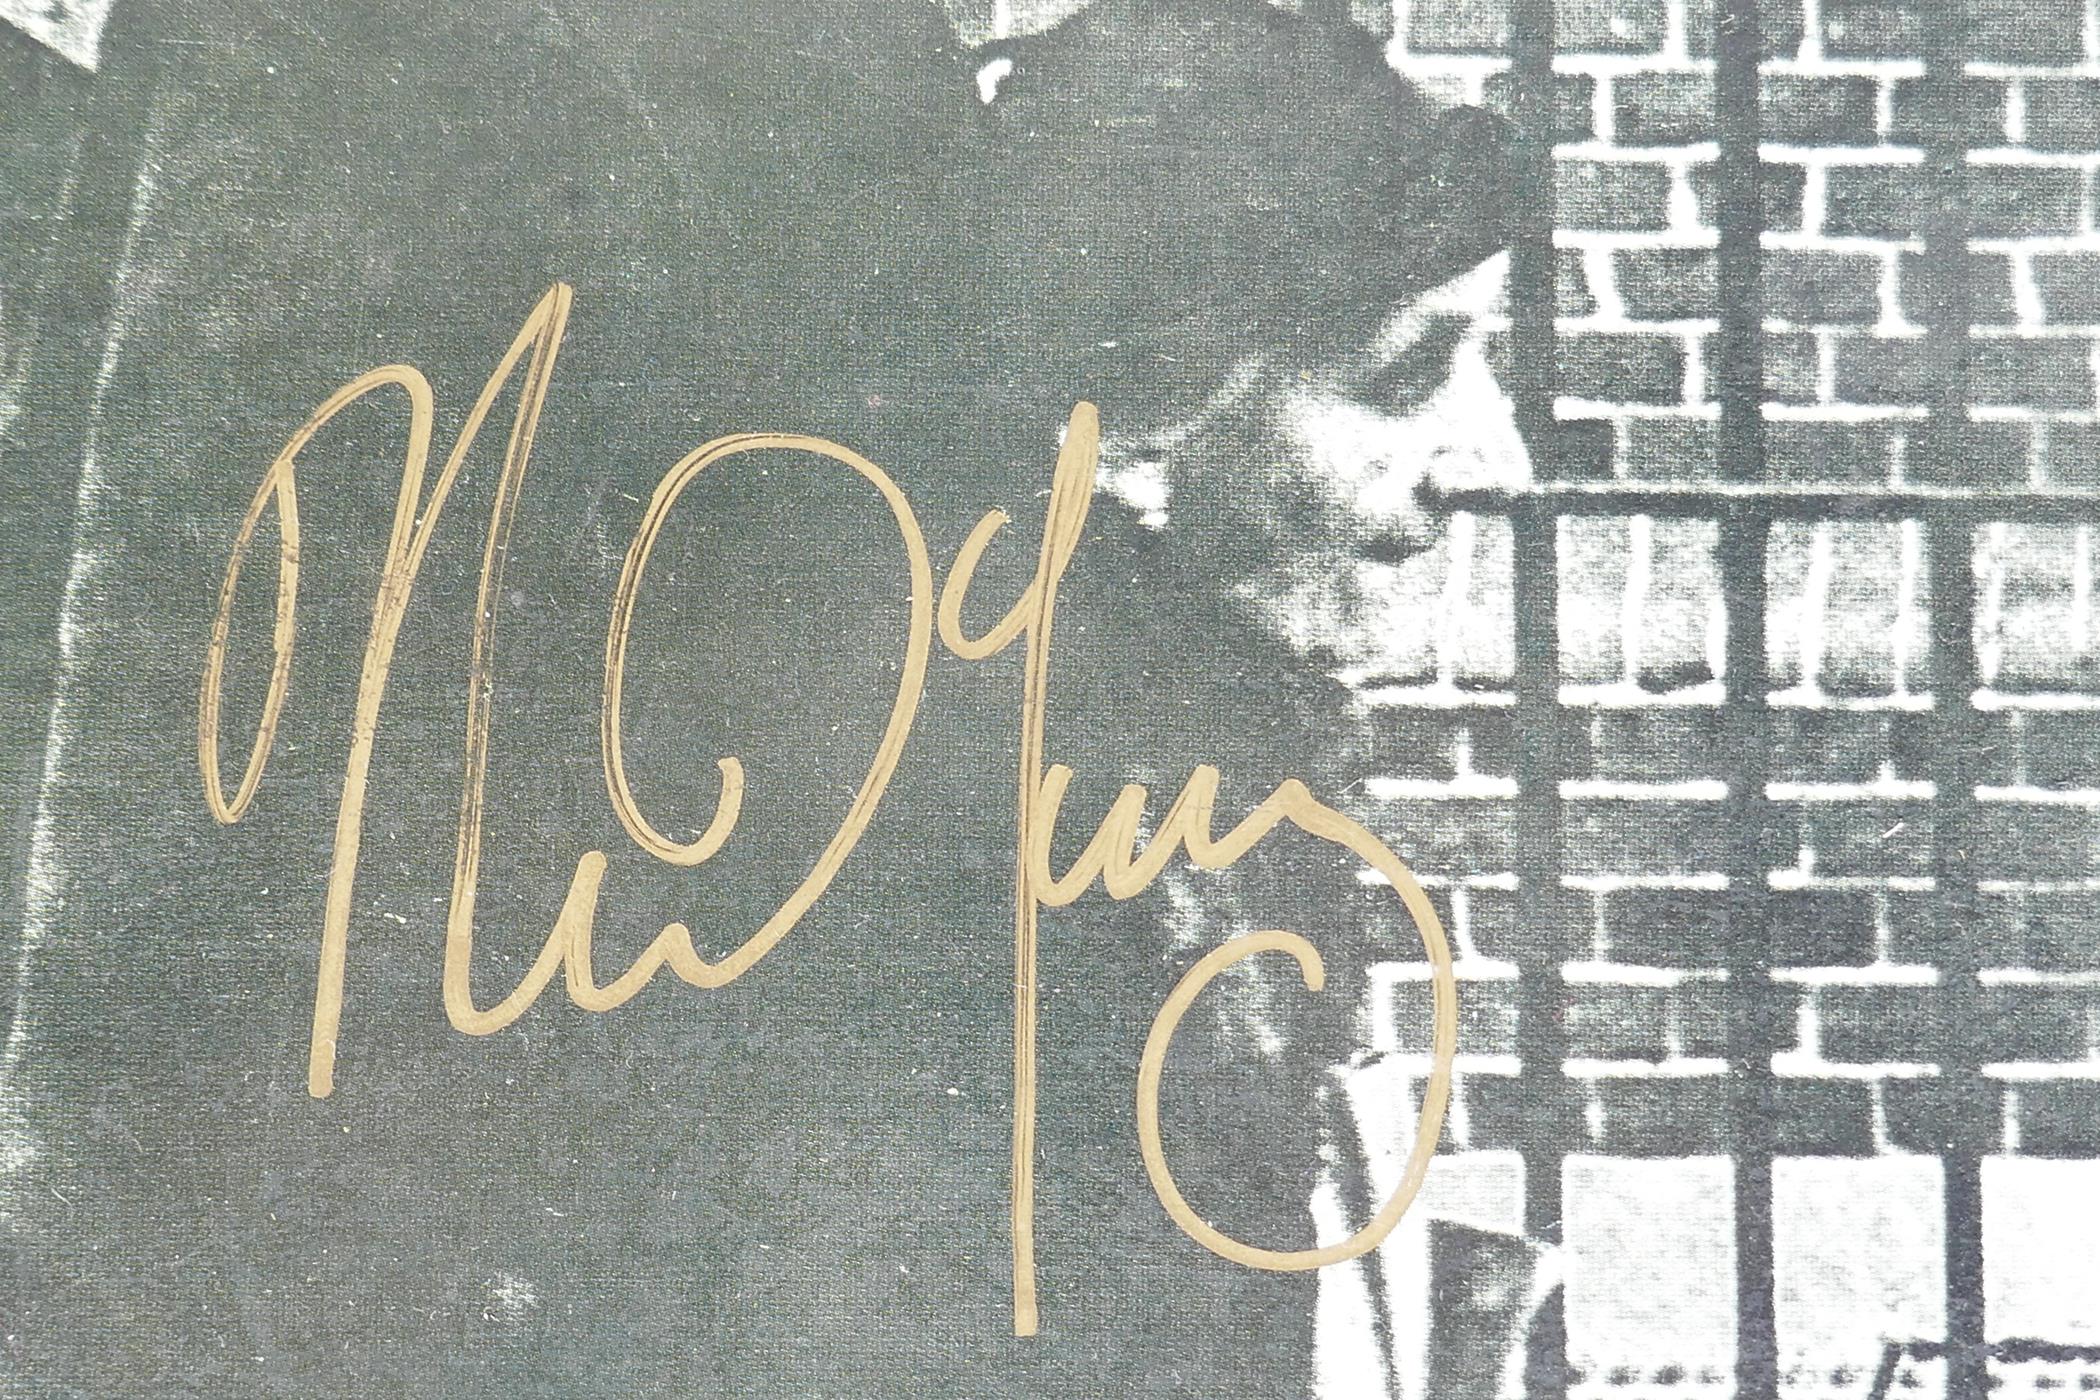 Neil Young, 12" vinyl album 'After The Gold Rush', cover signed by Neil - Image 2 of 2